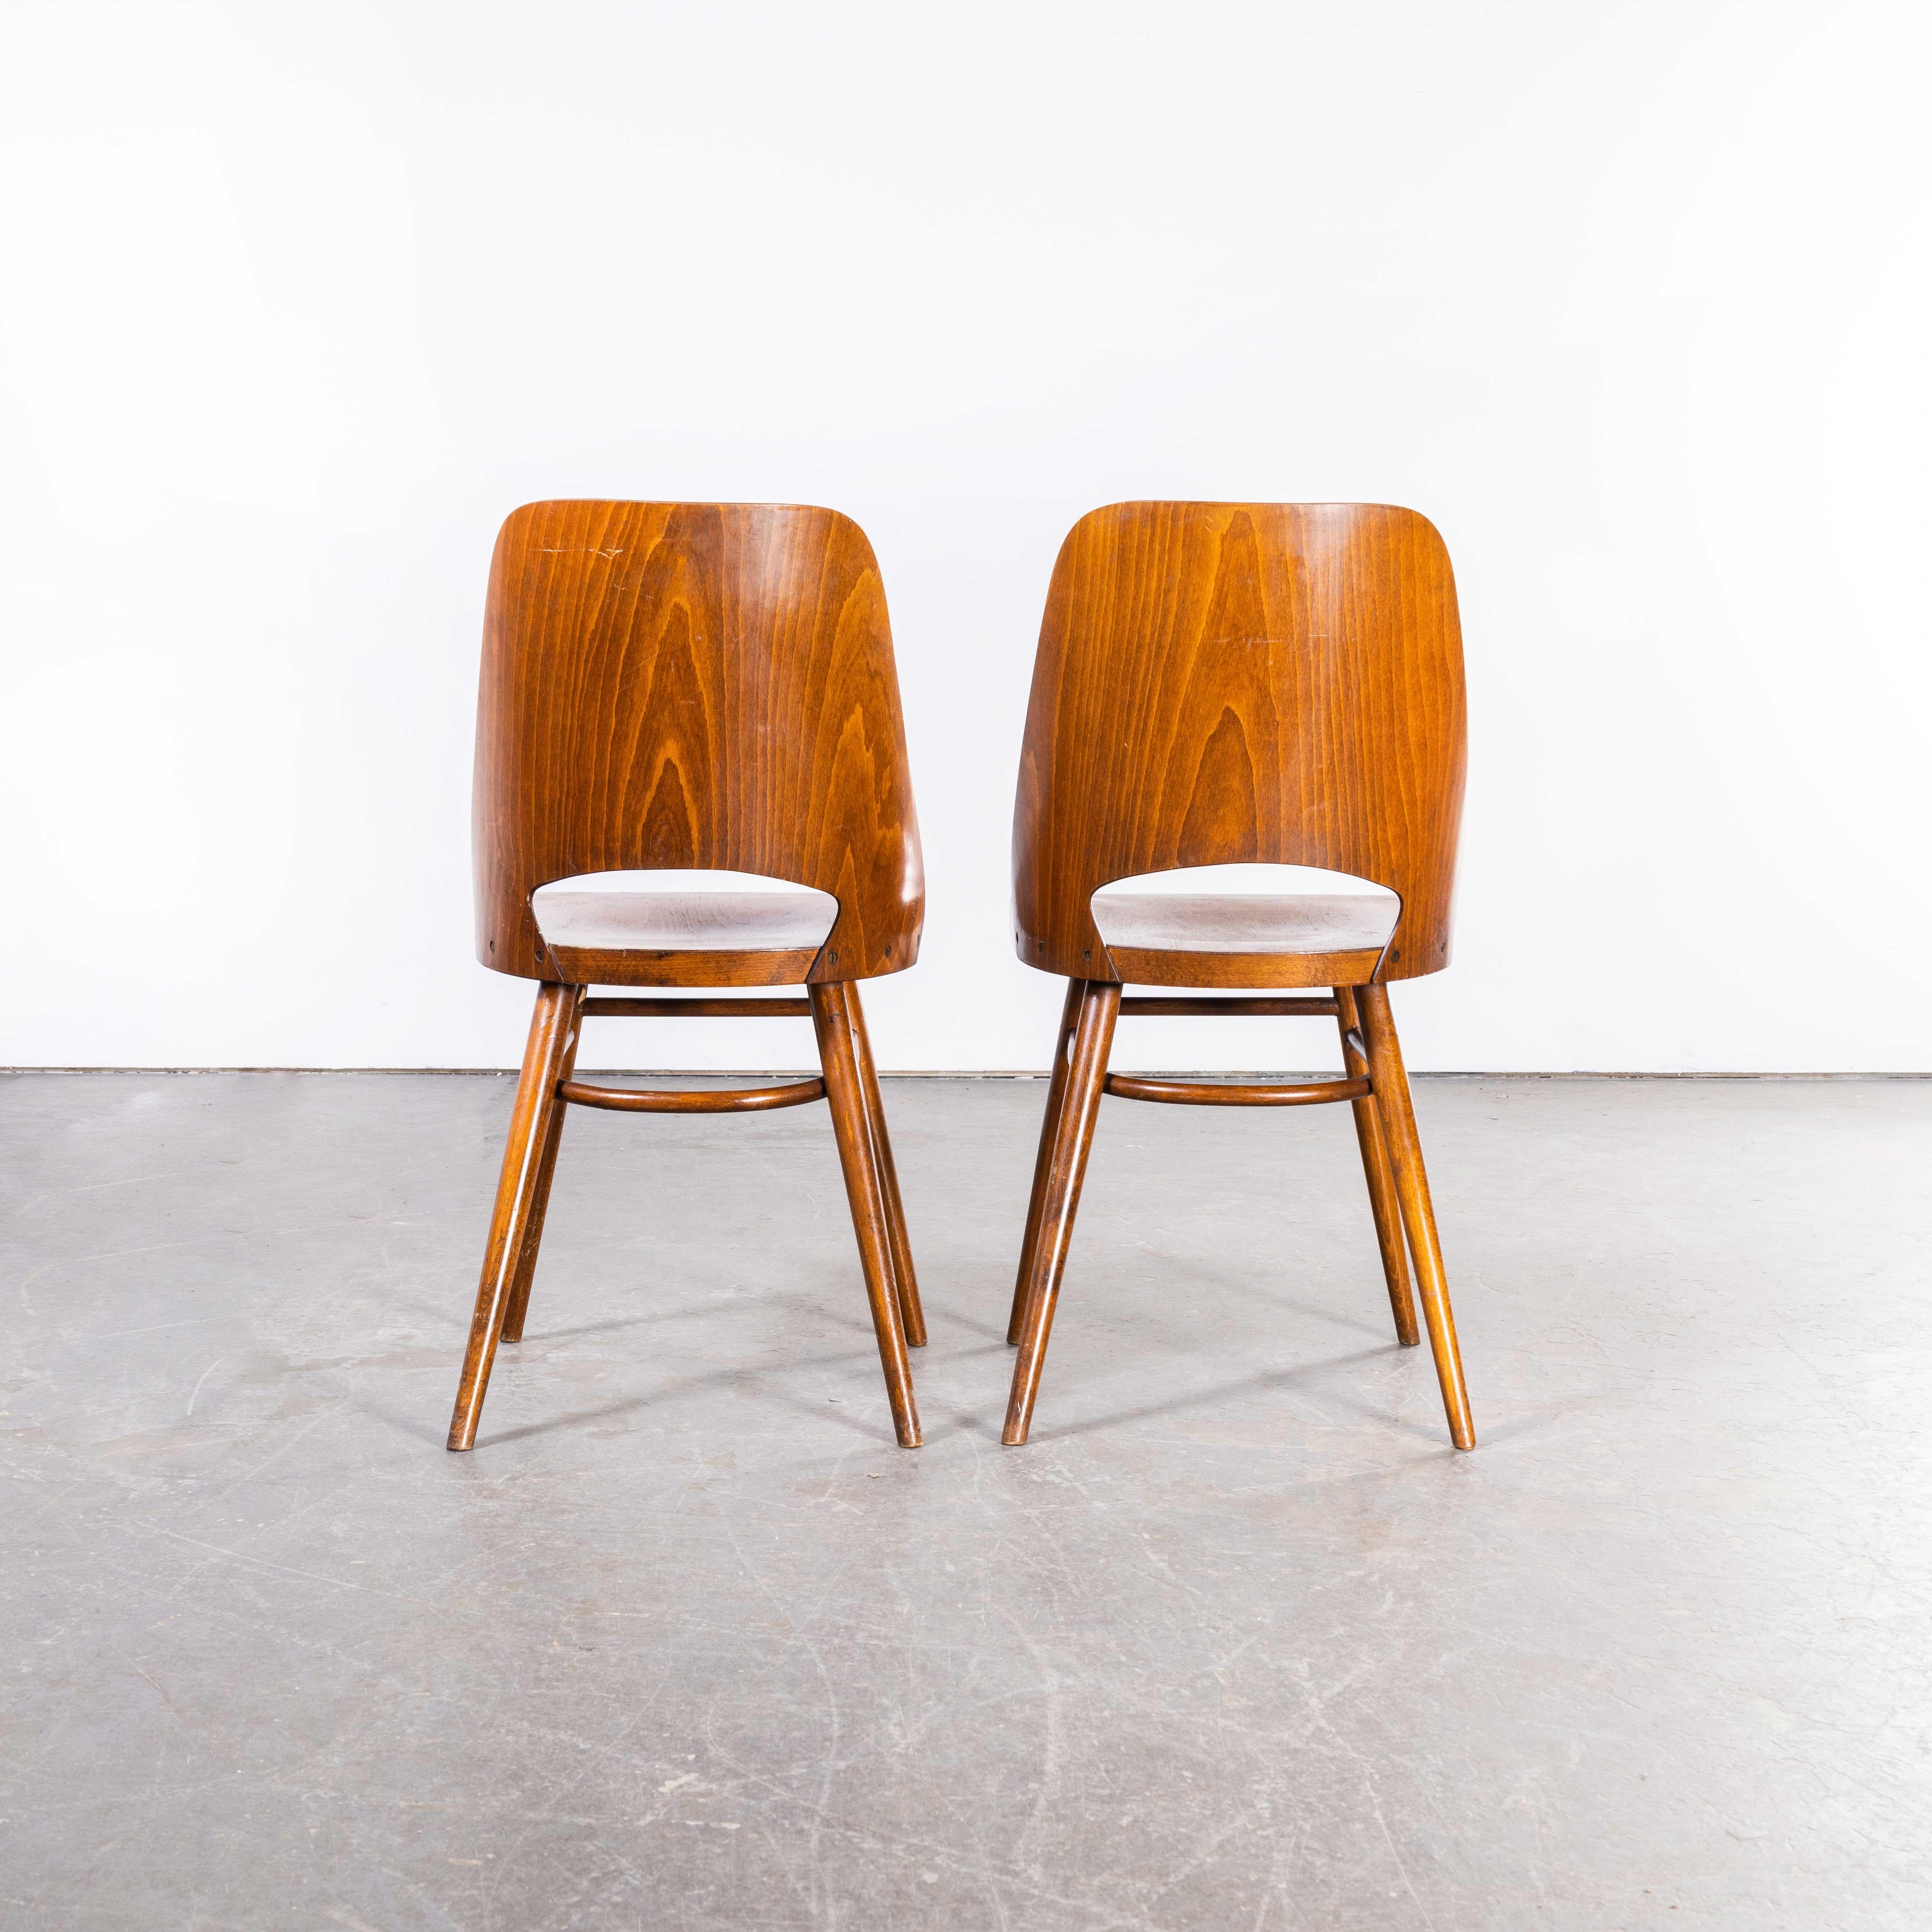 1950's Honey Beech Dining Chairs By Radomir Hoffman - Pair For Sale 4